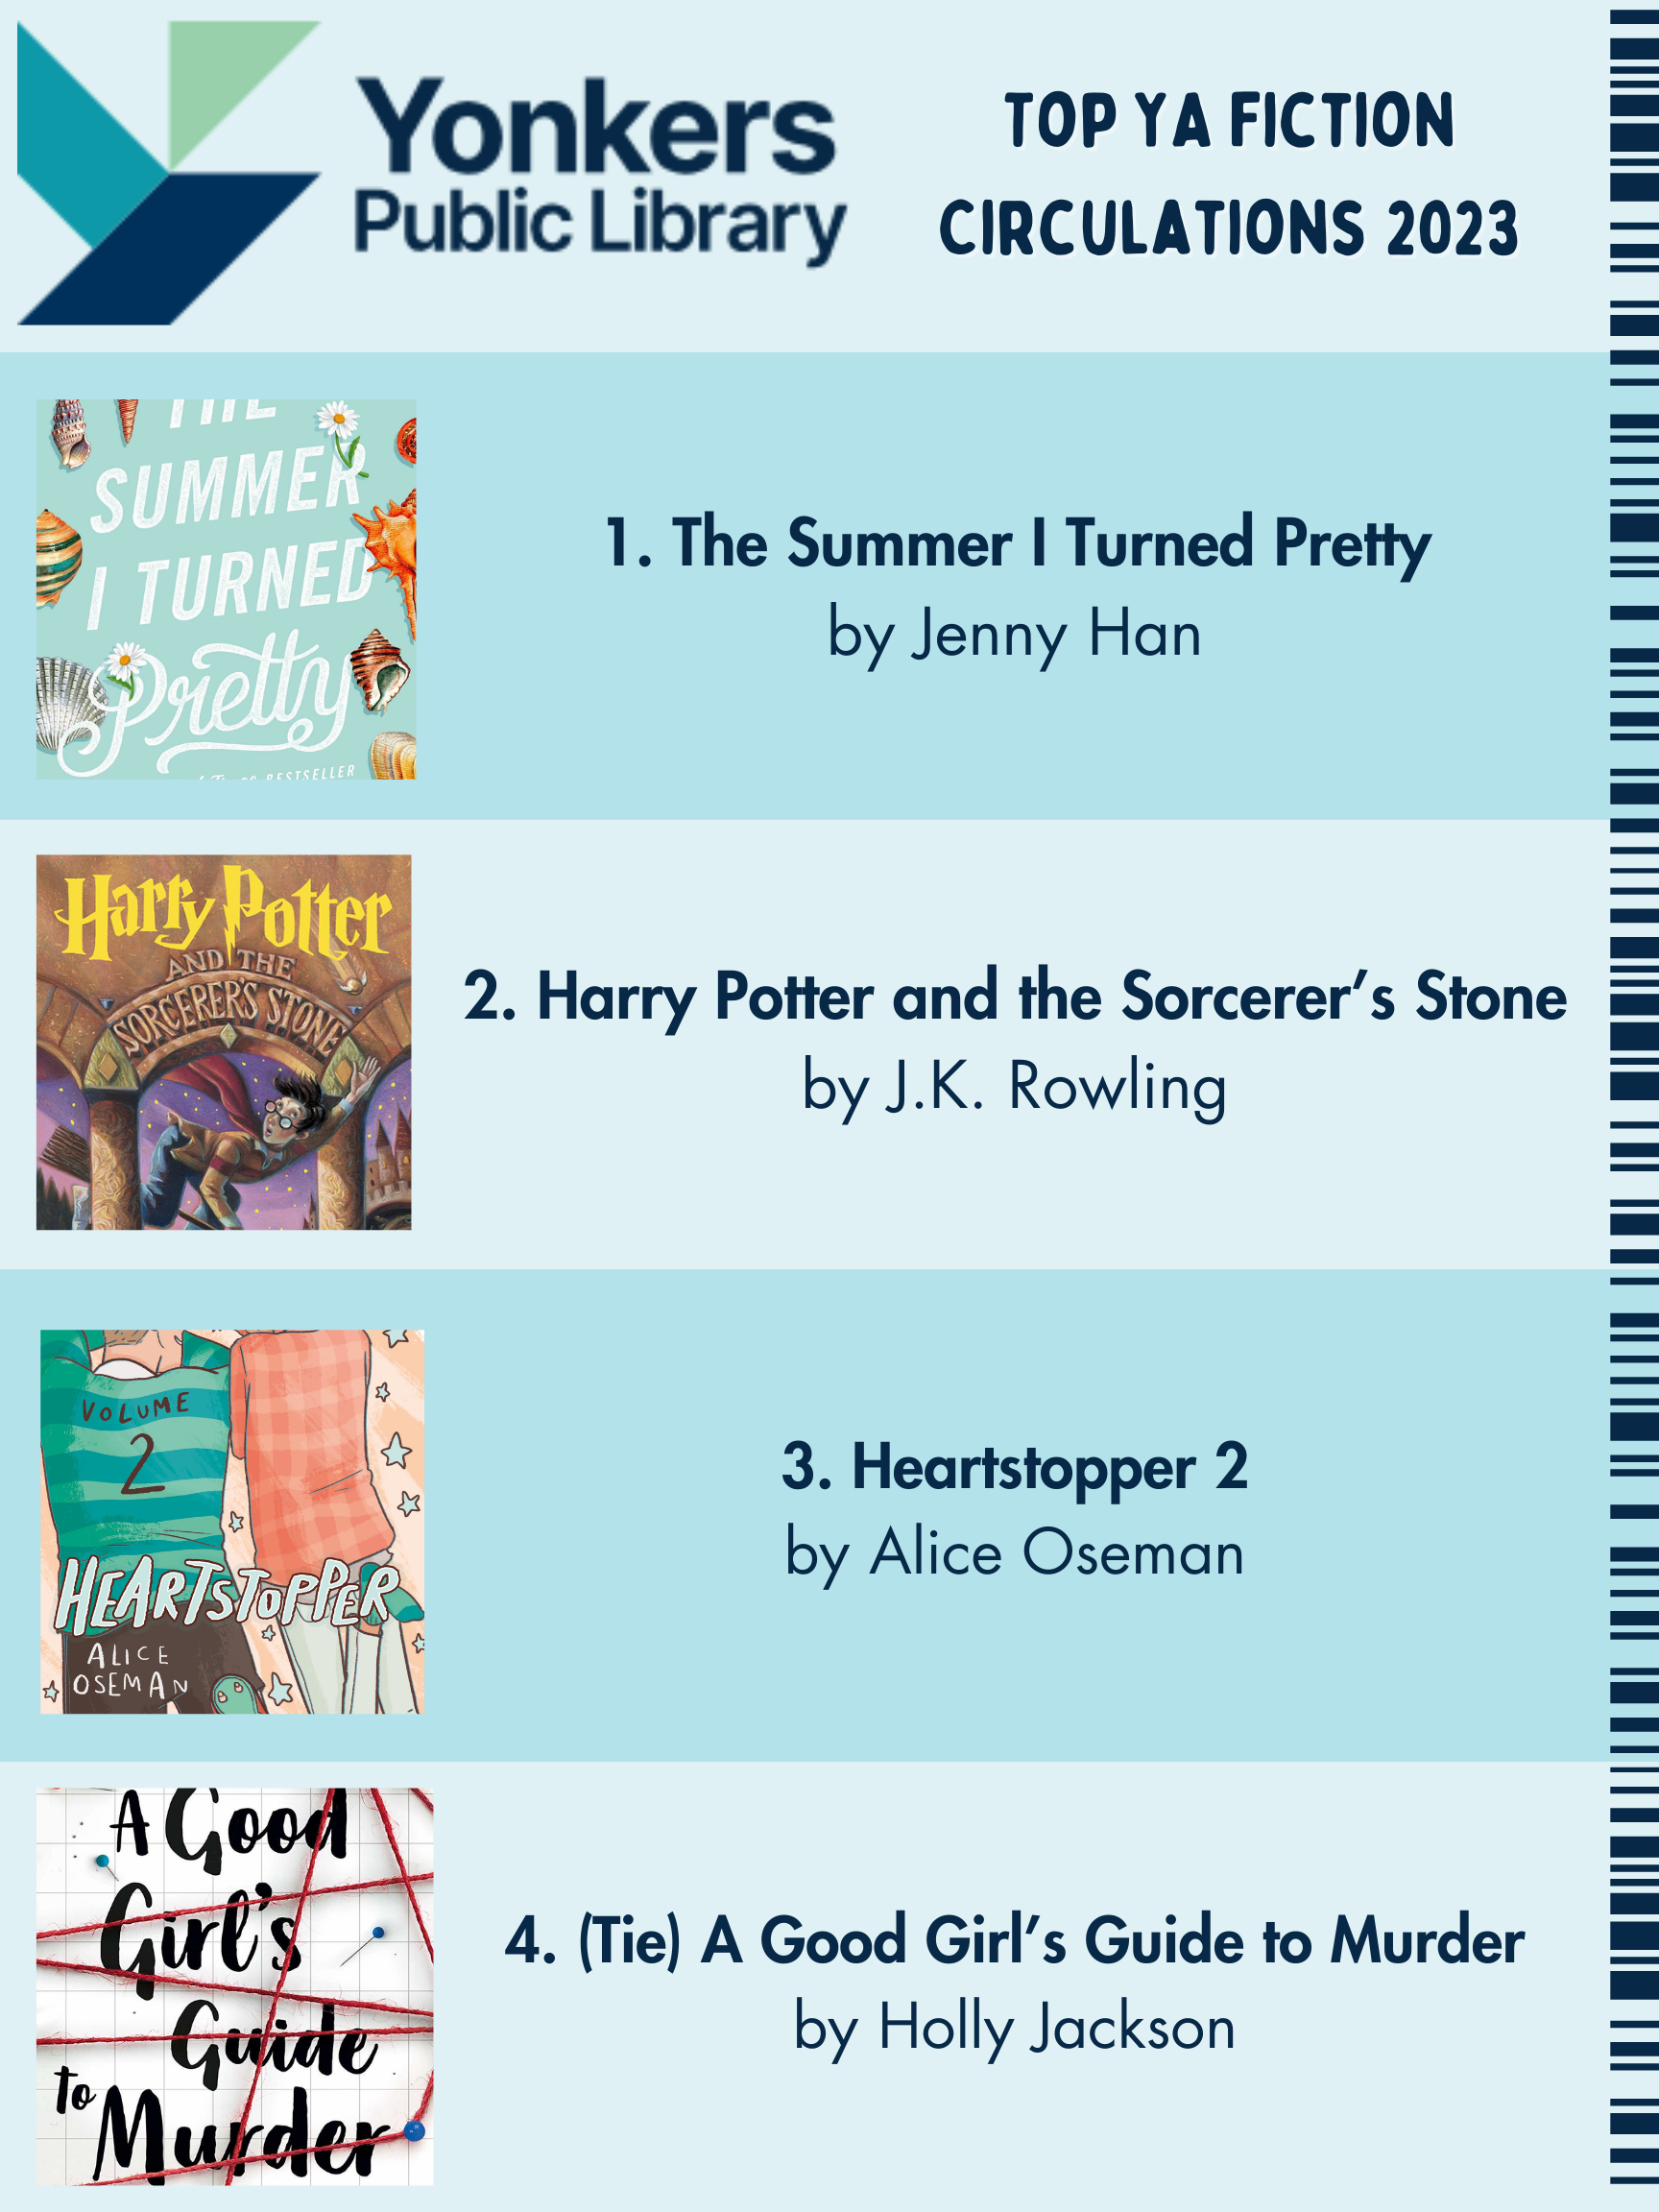 Top YA Fiction Circulations 2023. The Summer I Turned, Pretty, Harry Potter and the Sorcerer's Stone, Heartstopper 2, and A Good Girl's Guide to Murder.